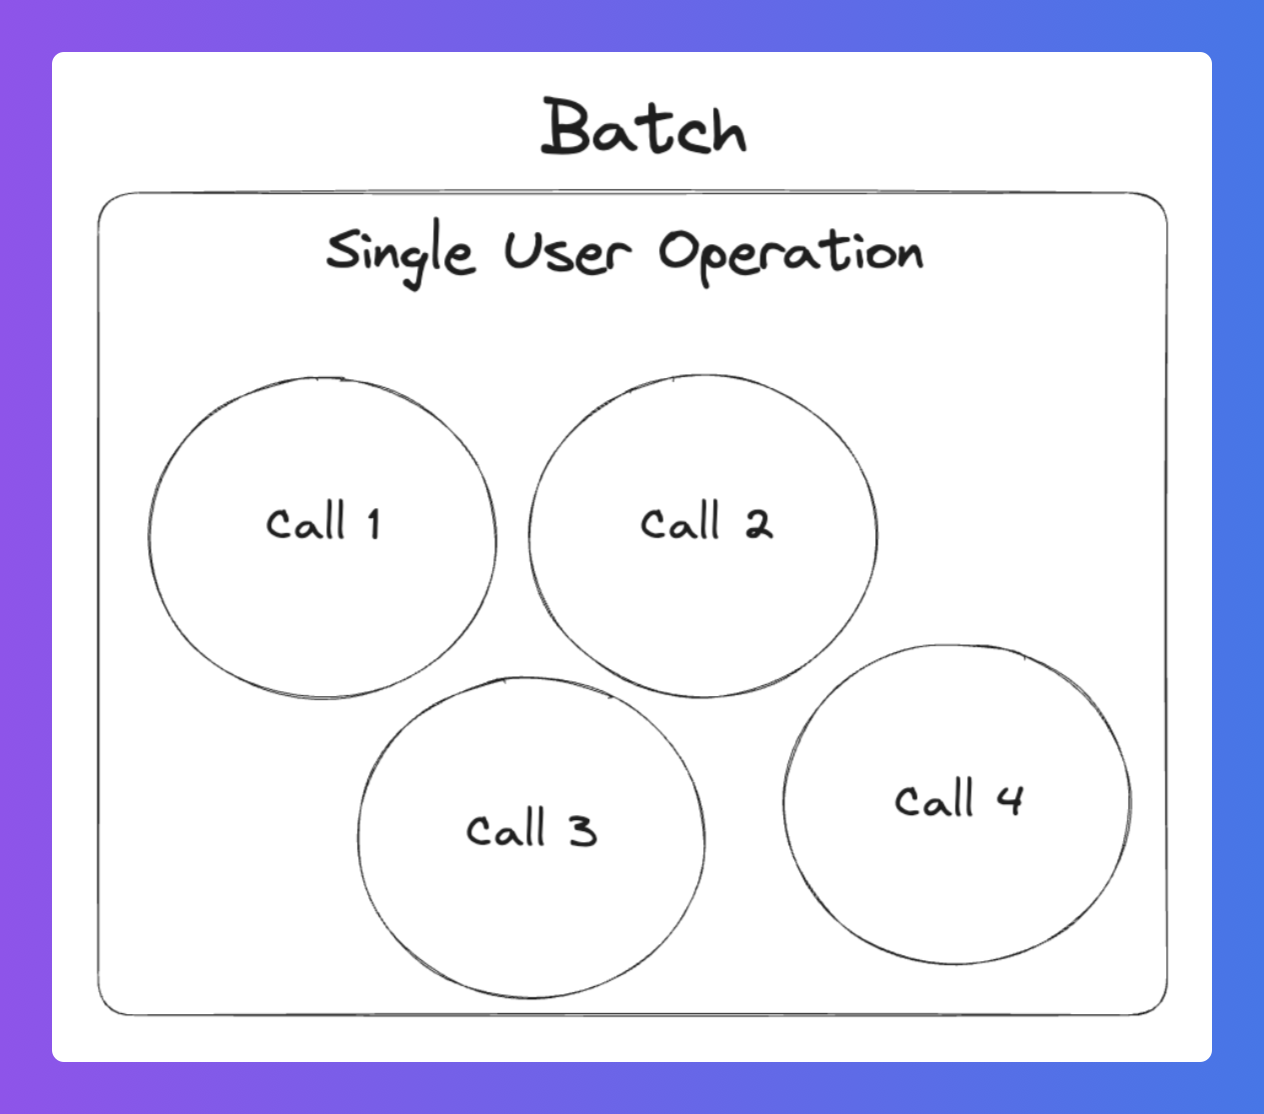 Diagram of a multiple calls in a single user operation.